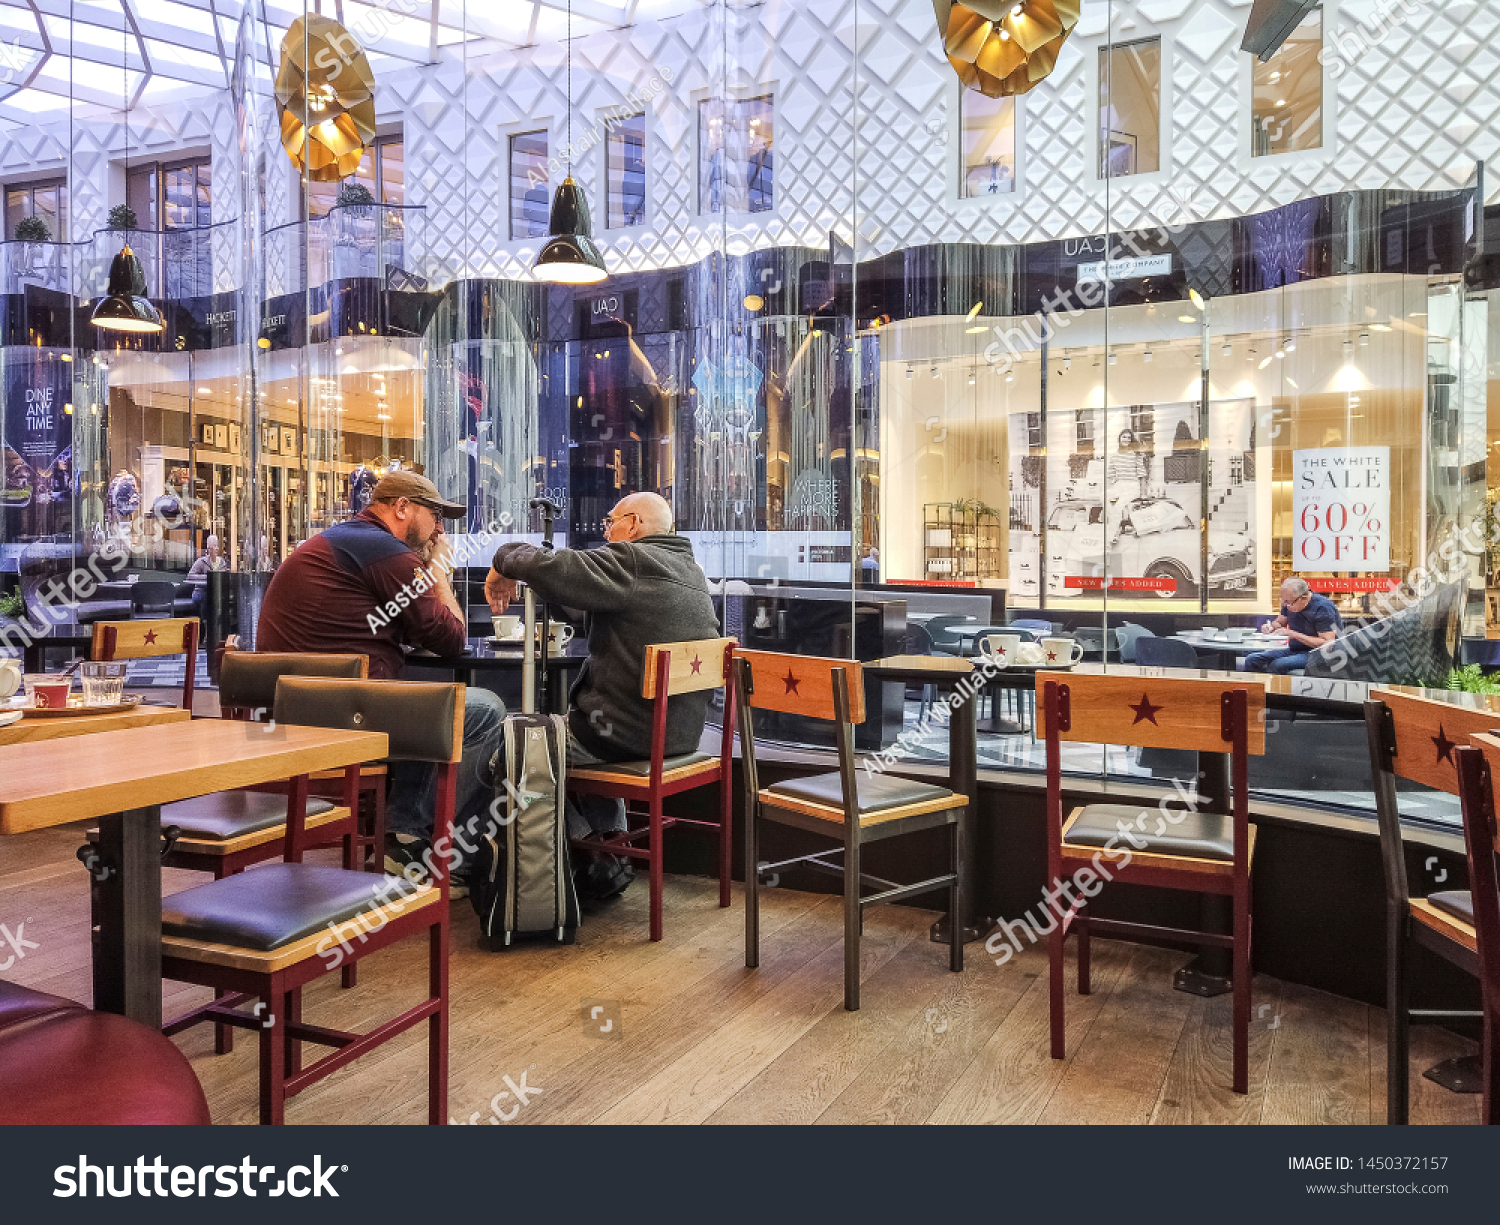 LEEDS, UK - JULY 13, 2019: Customers in the interior of Pret a Manger, a British international sandwich shop chain #1450372157